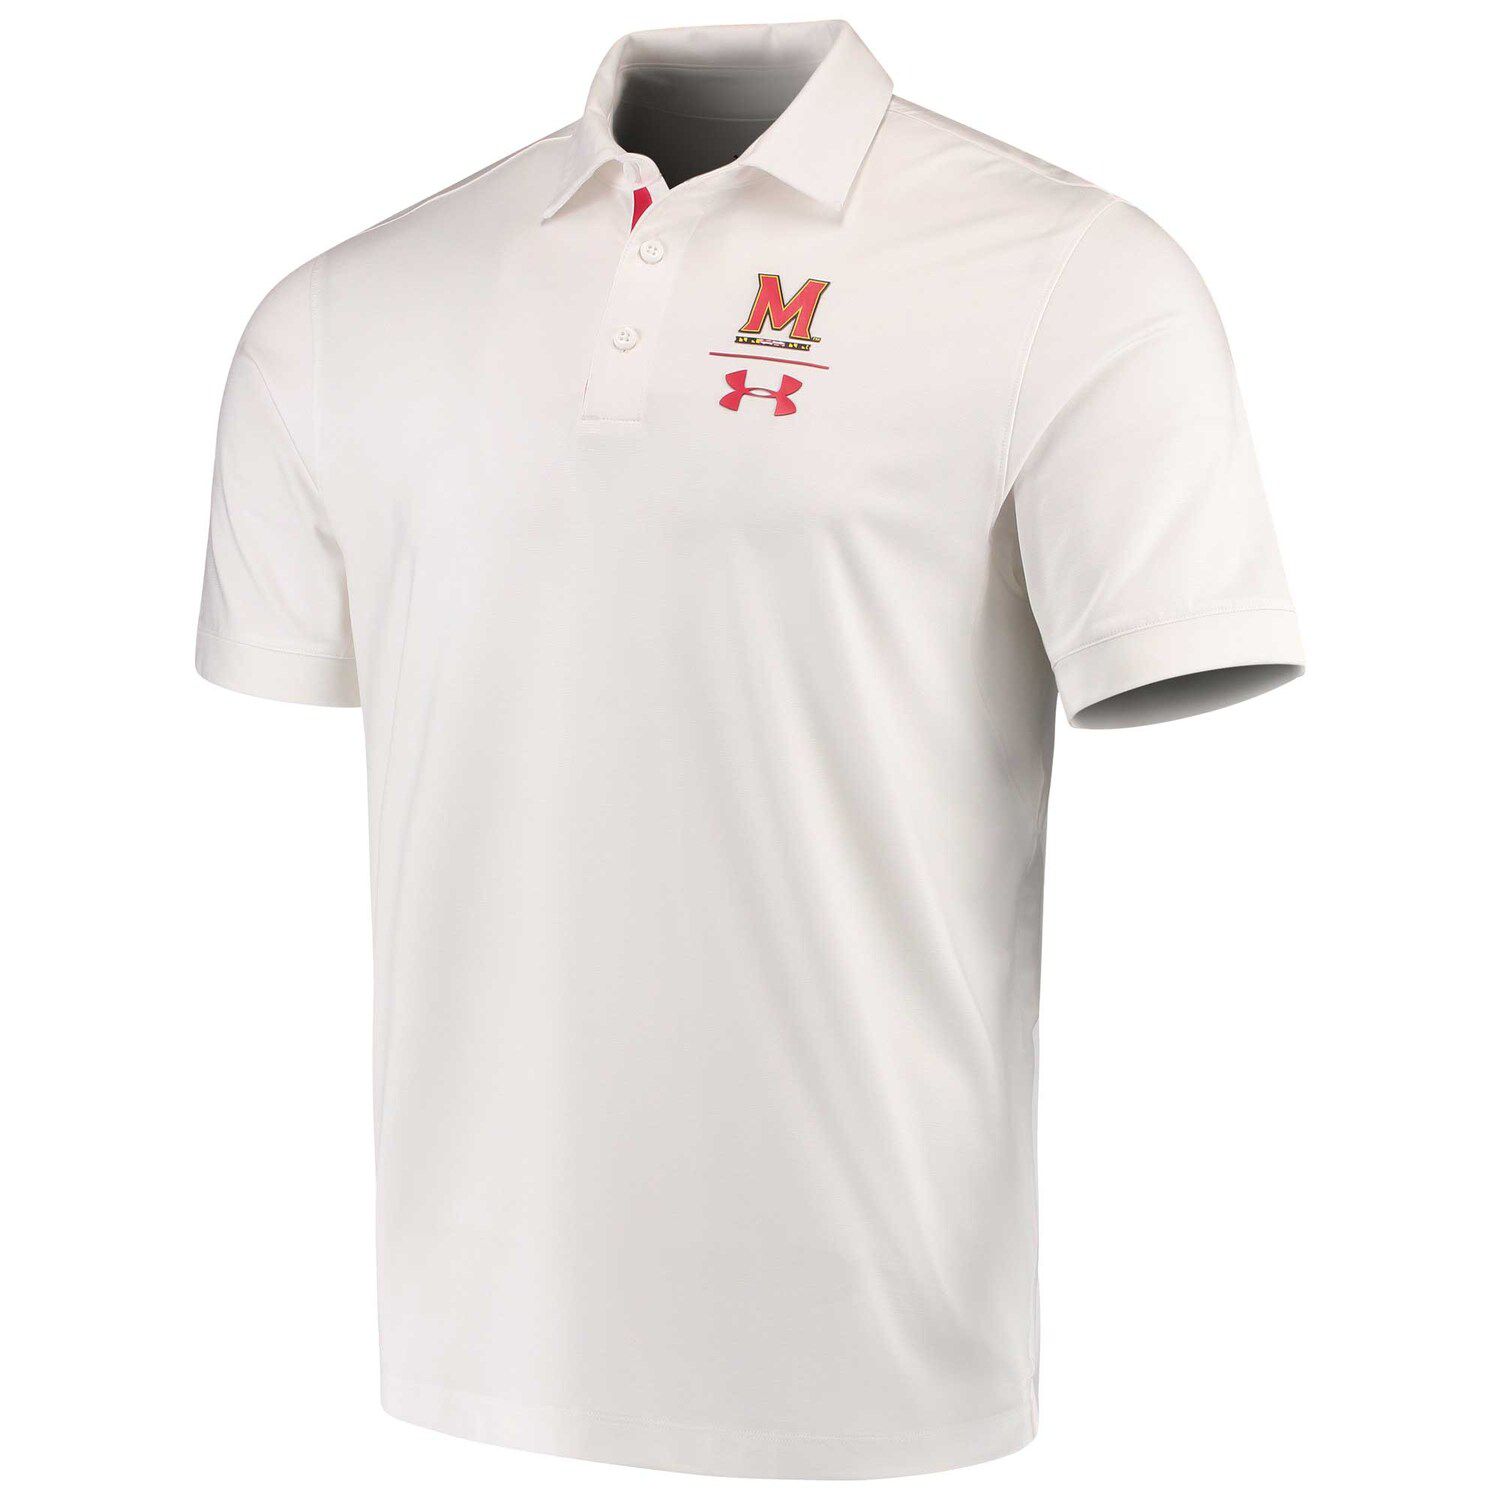 under armour vented polo